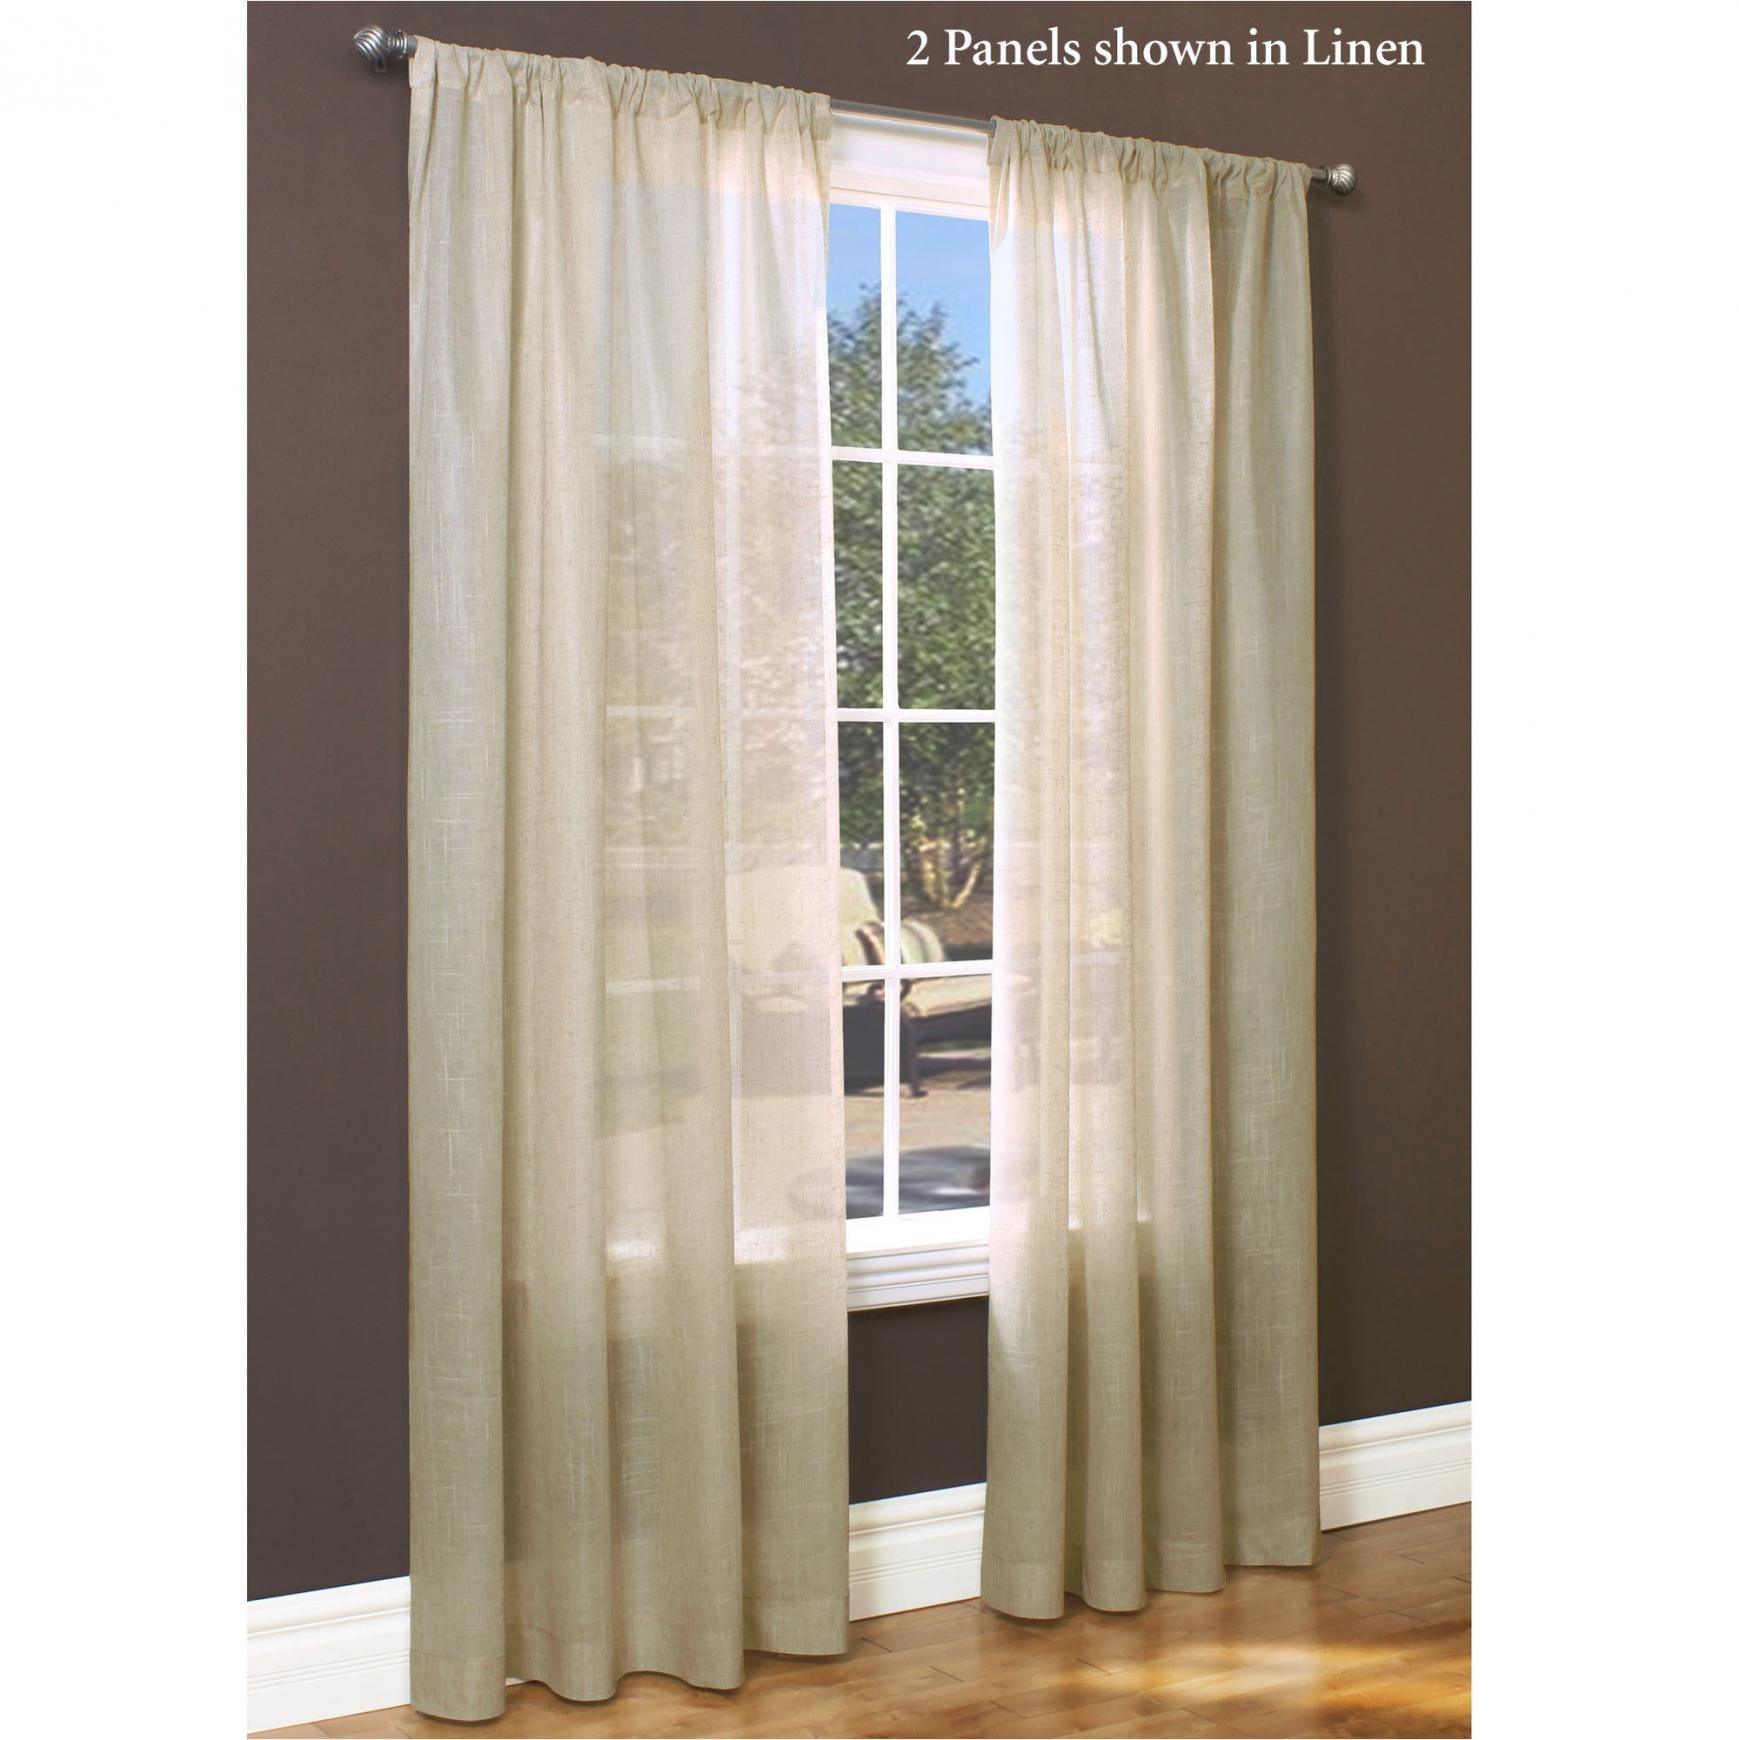 Kmart Living Room Curtains
 Curtains Fresh Curtains At Kmart To Add A Little Sunshine